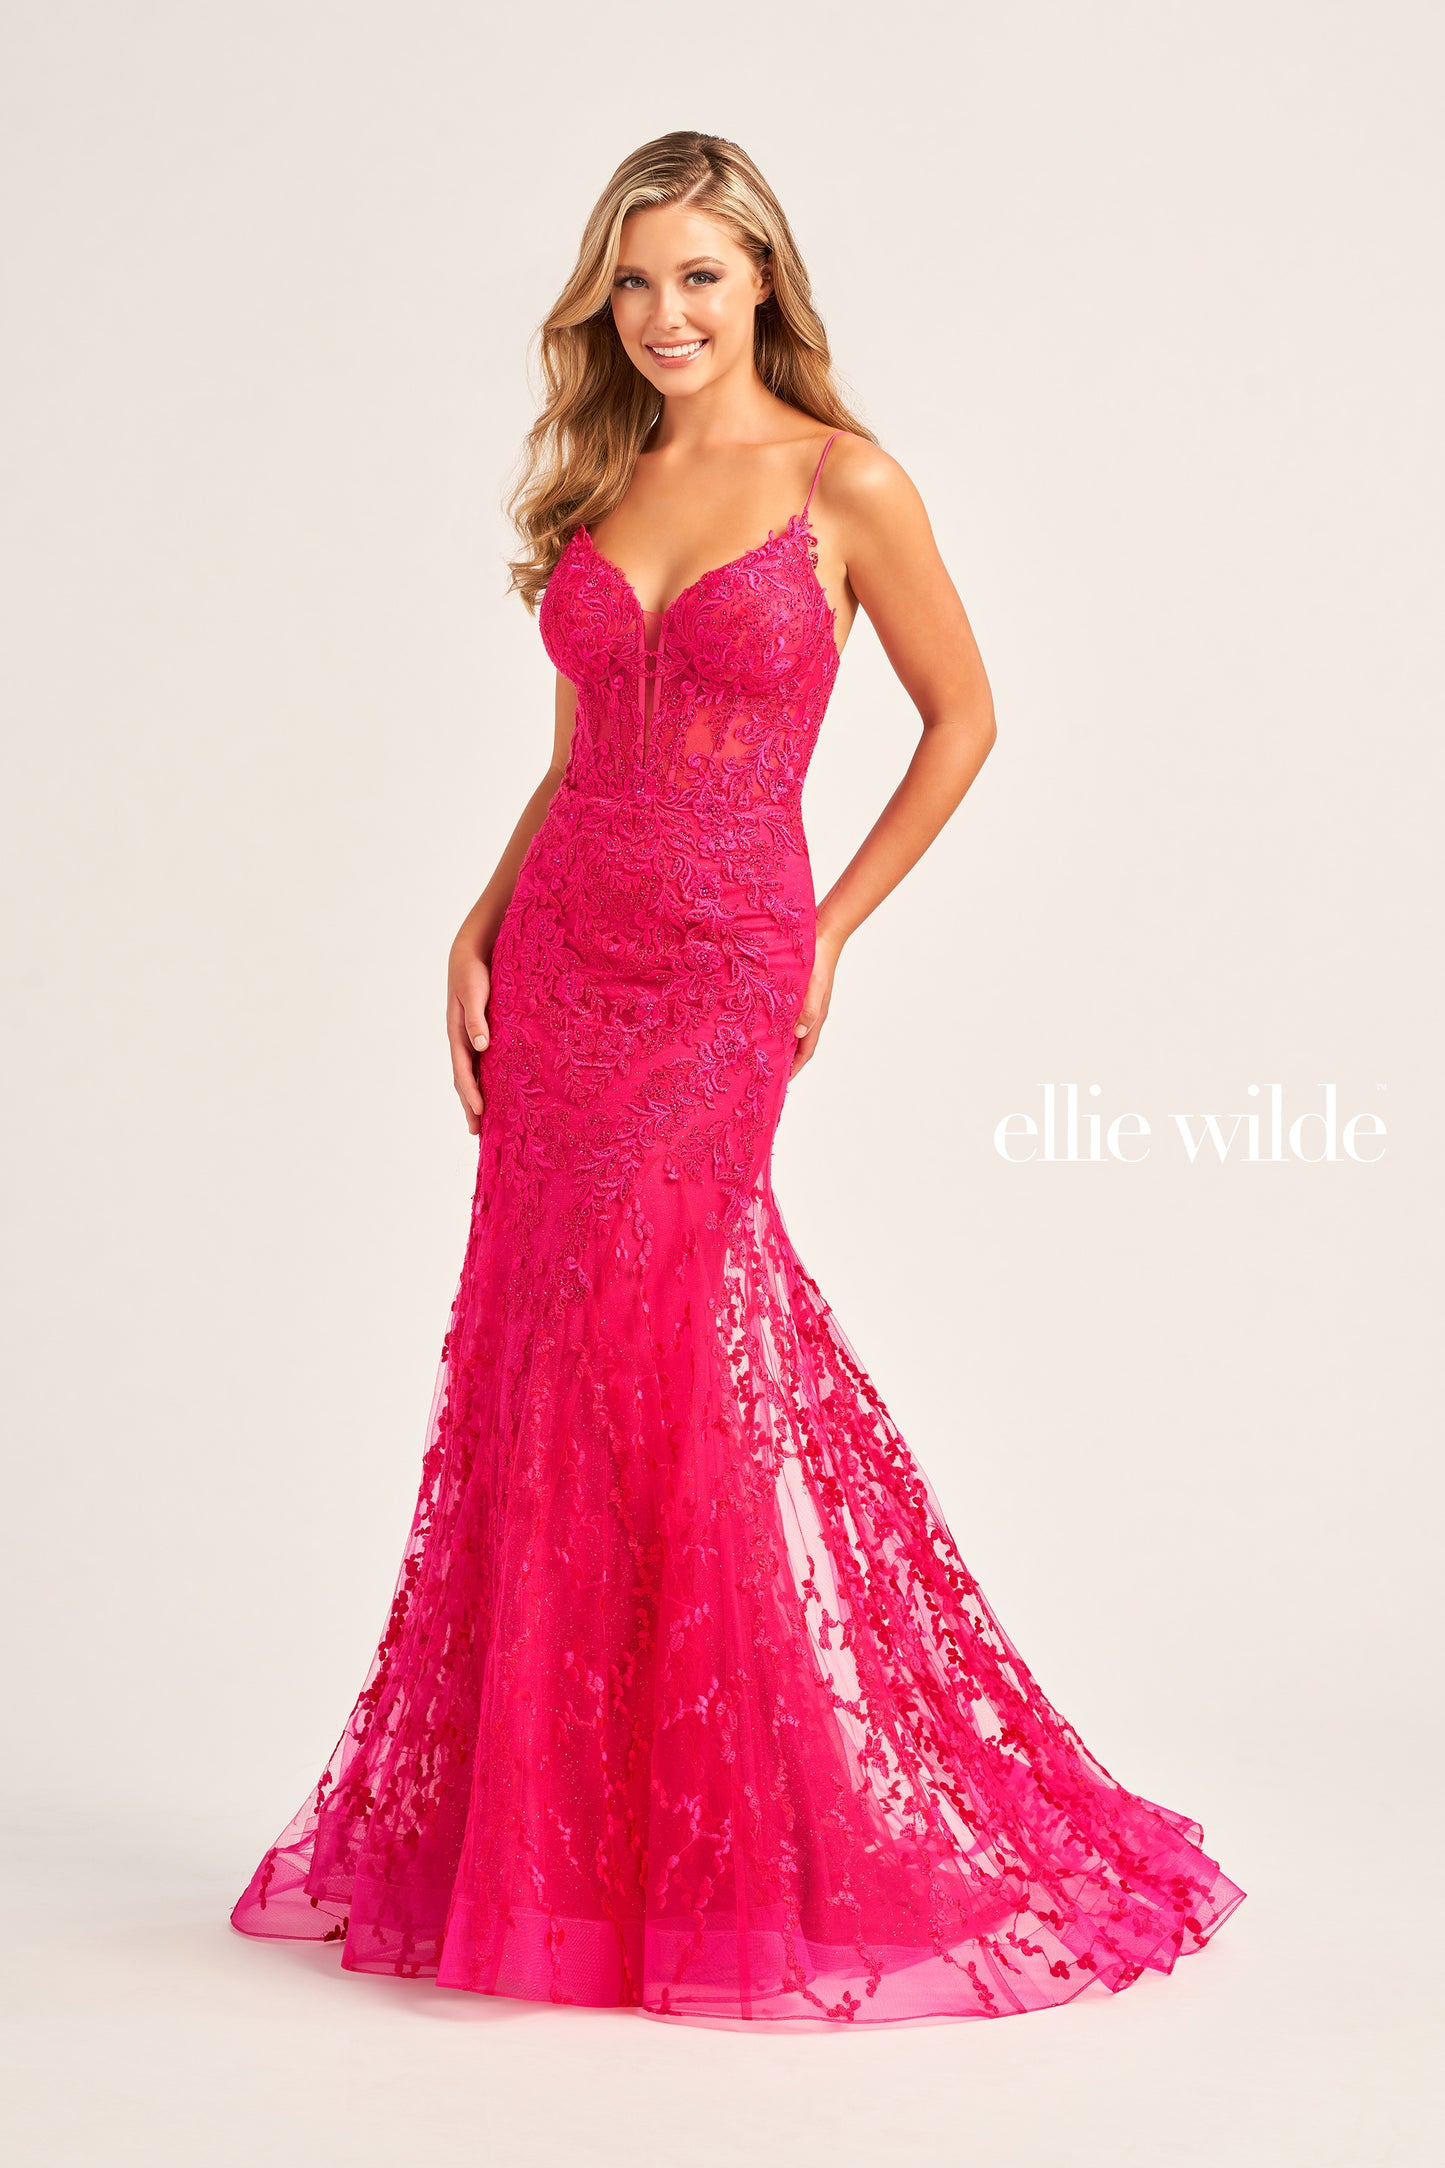 The Ellie Wilde EW35010 dress features a plunging sweetheart neckline, corset bodice, and lace-up back to flatter your figure while adding a touch of sophistication. Crafted from shimmering tulle, glitter tulle, lace, and embellished with stone accents, this long trumpet silhouette is perfect for making a statement on your special day. Plus, this dress is designed with a natural waistline for comfort.  COLOR: BLACK, ORANGE, LIGHT YELLOW, MAGENTA, EMERALD, ROYAL BLUE, SAGE, STRAWBERRY SIZE: 00 - 20